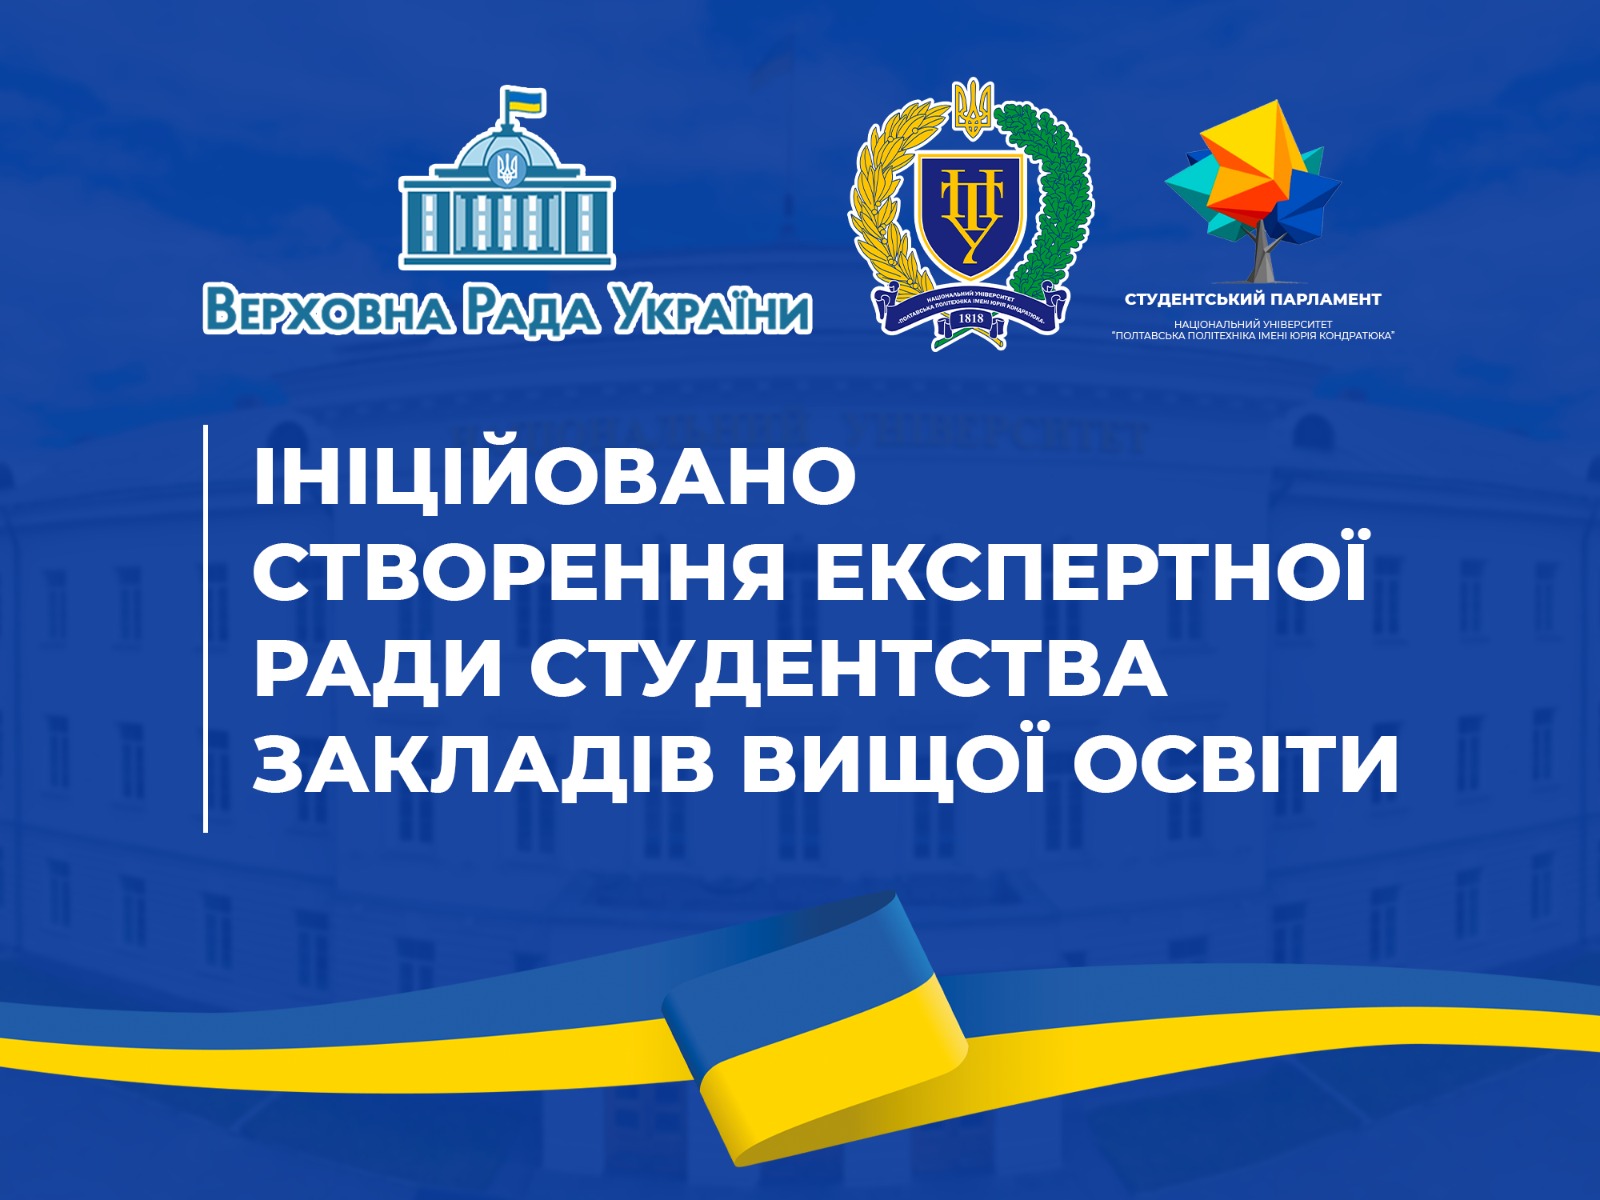 Poltava Polytechnic University supports the establishment of the Student Expert Council of Higher Education Institutions